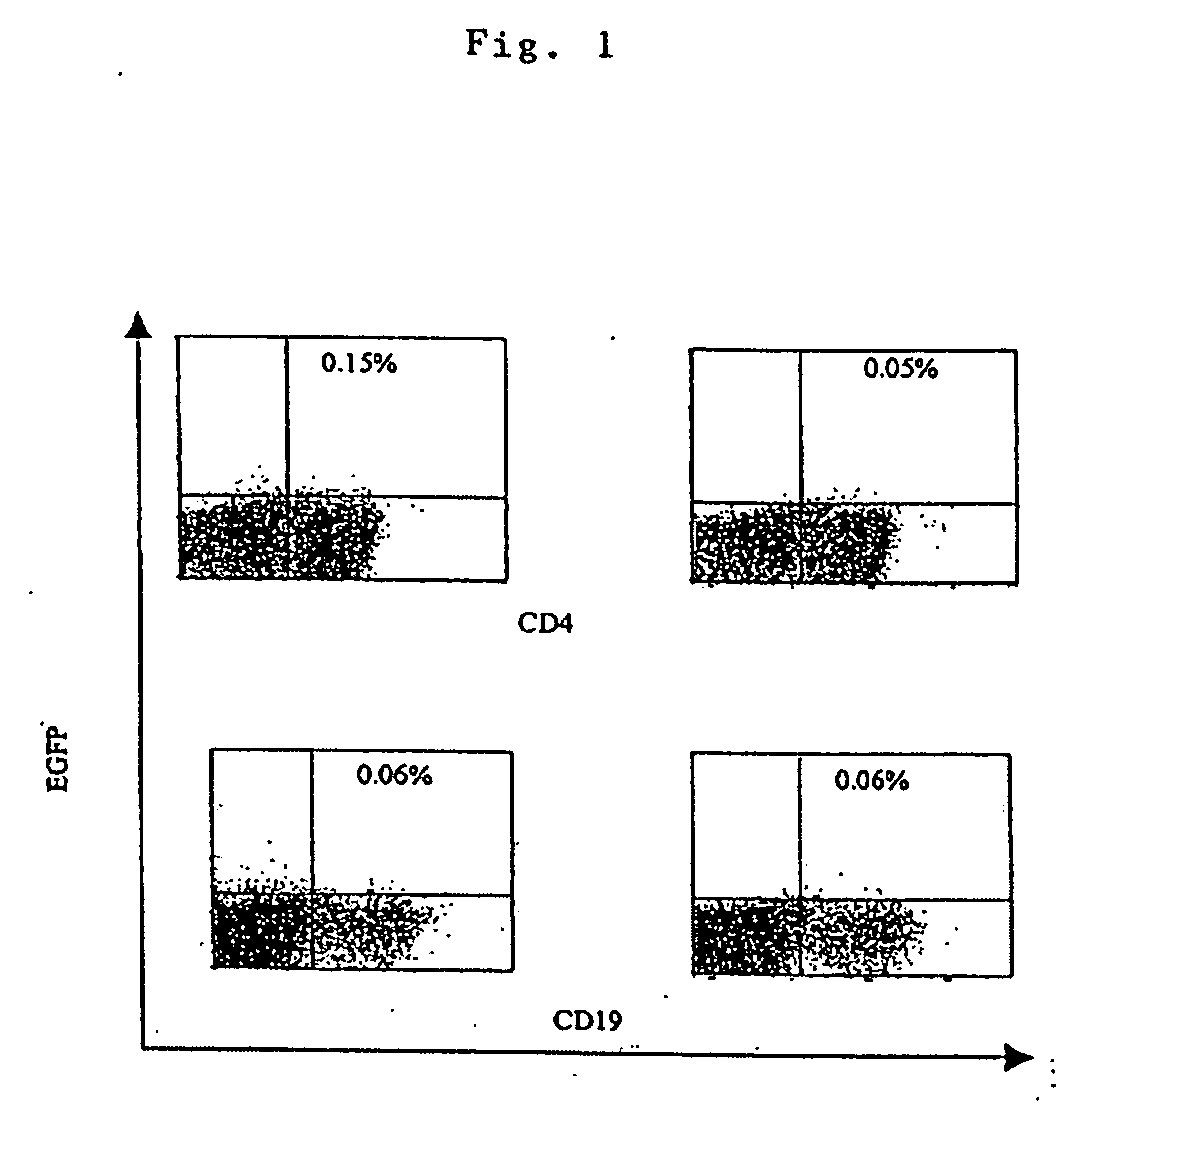 Transfection of blood cells with mRNA for immune stimulation and gene therapy